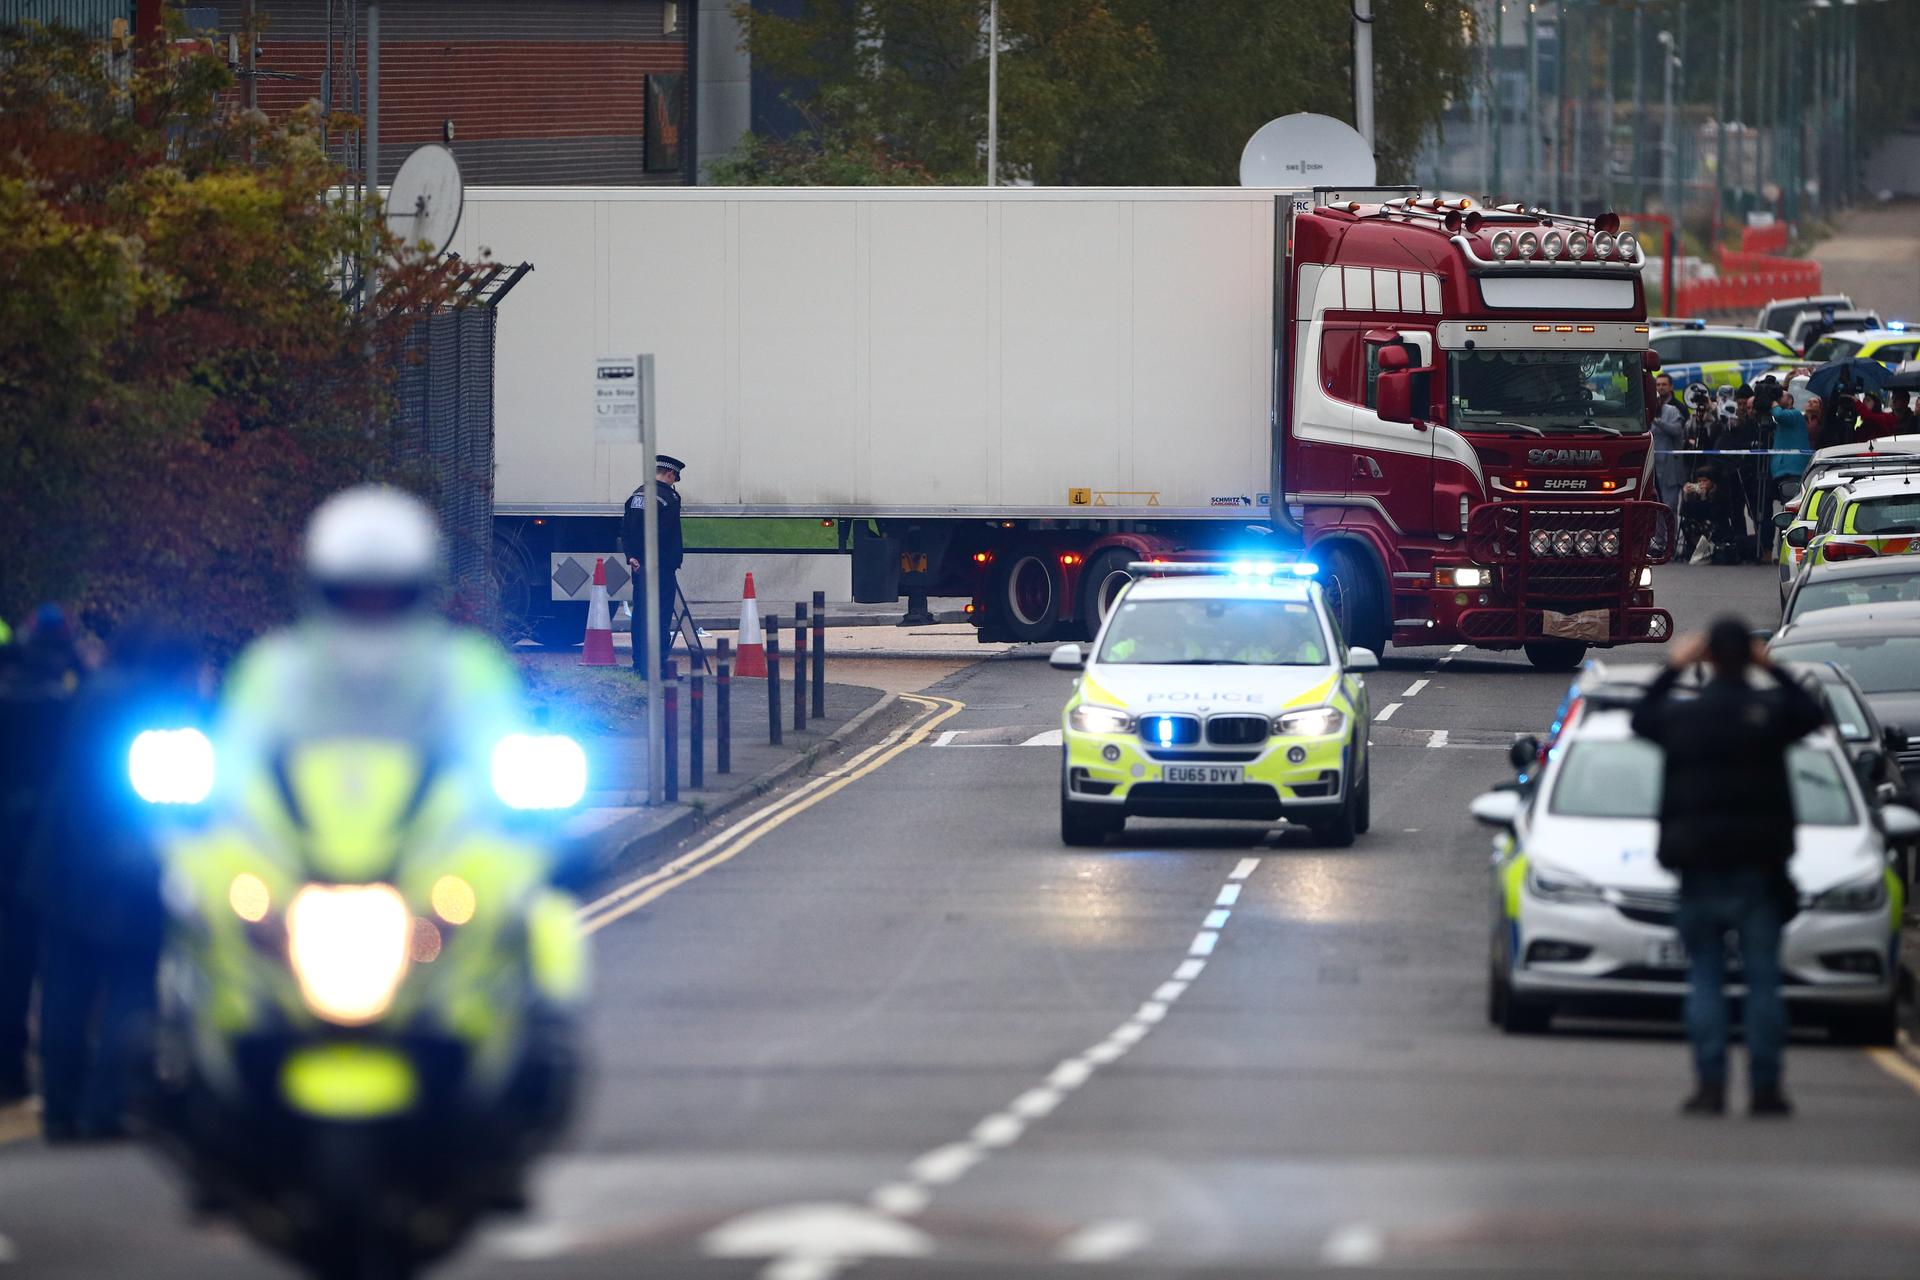 Police say all 39 people found dead in UK truck were Vietnamese